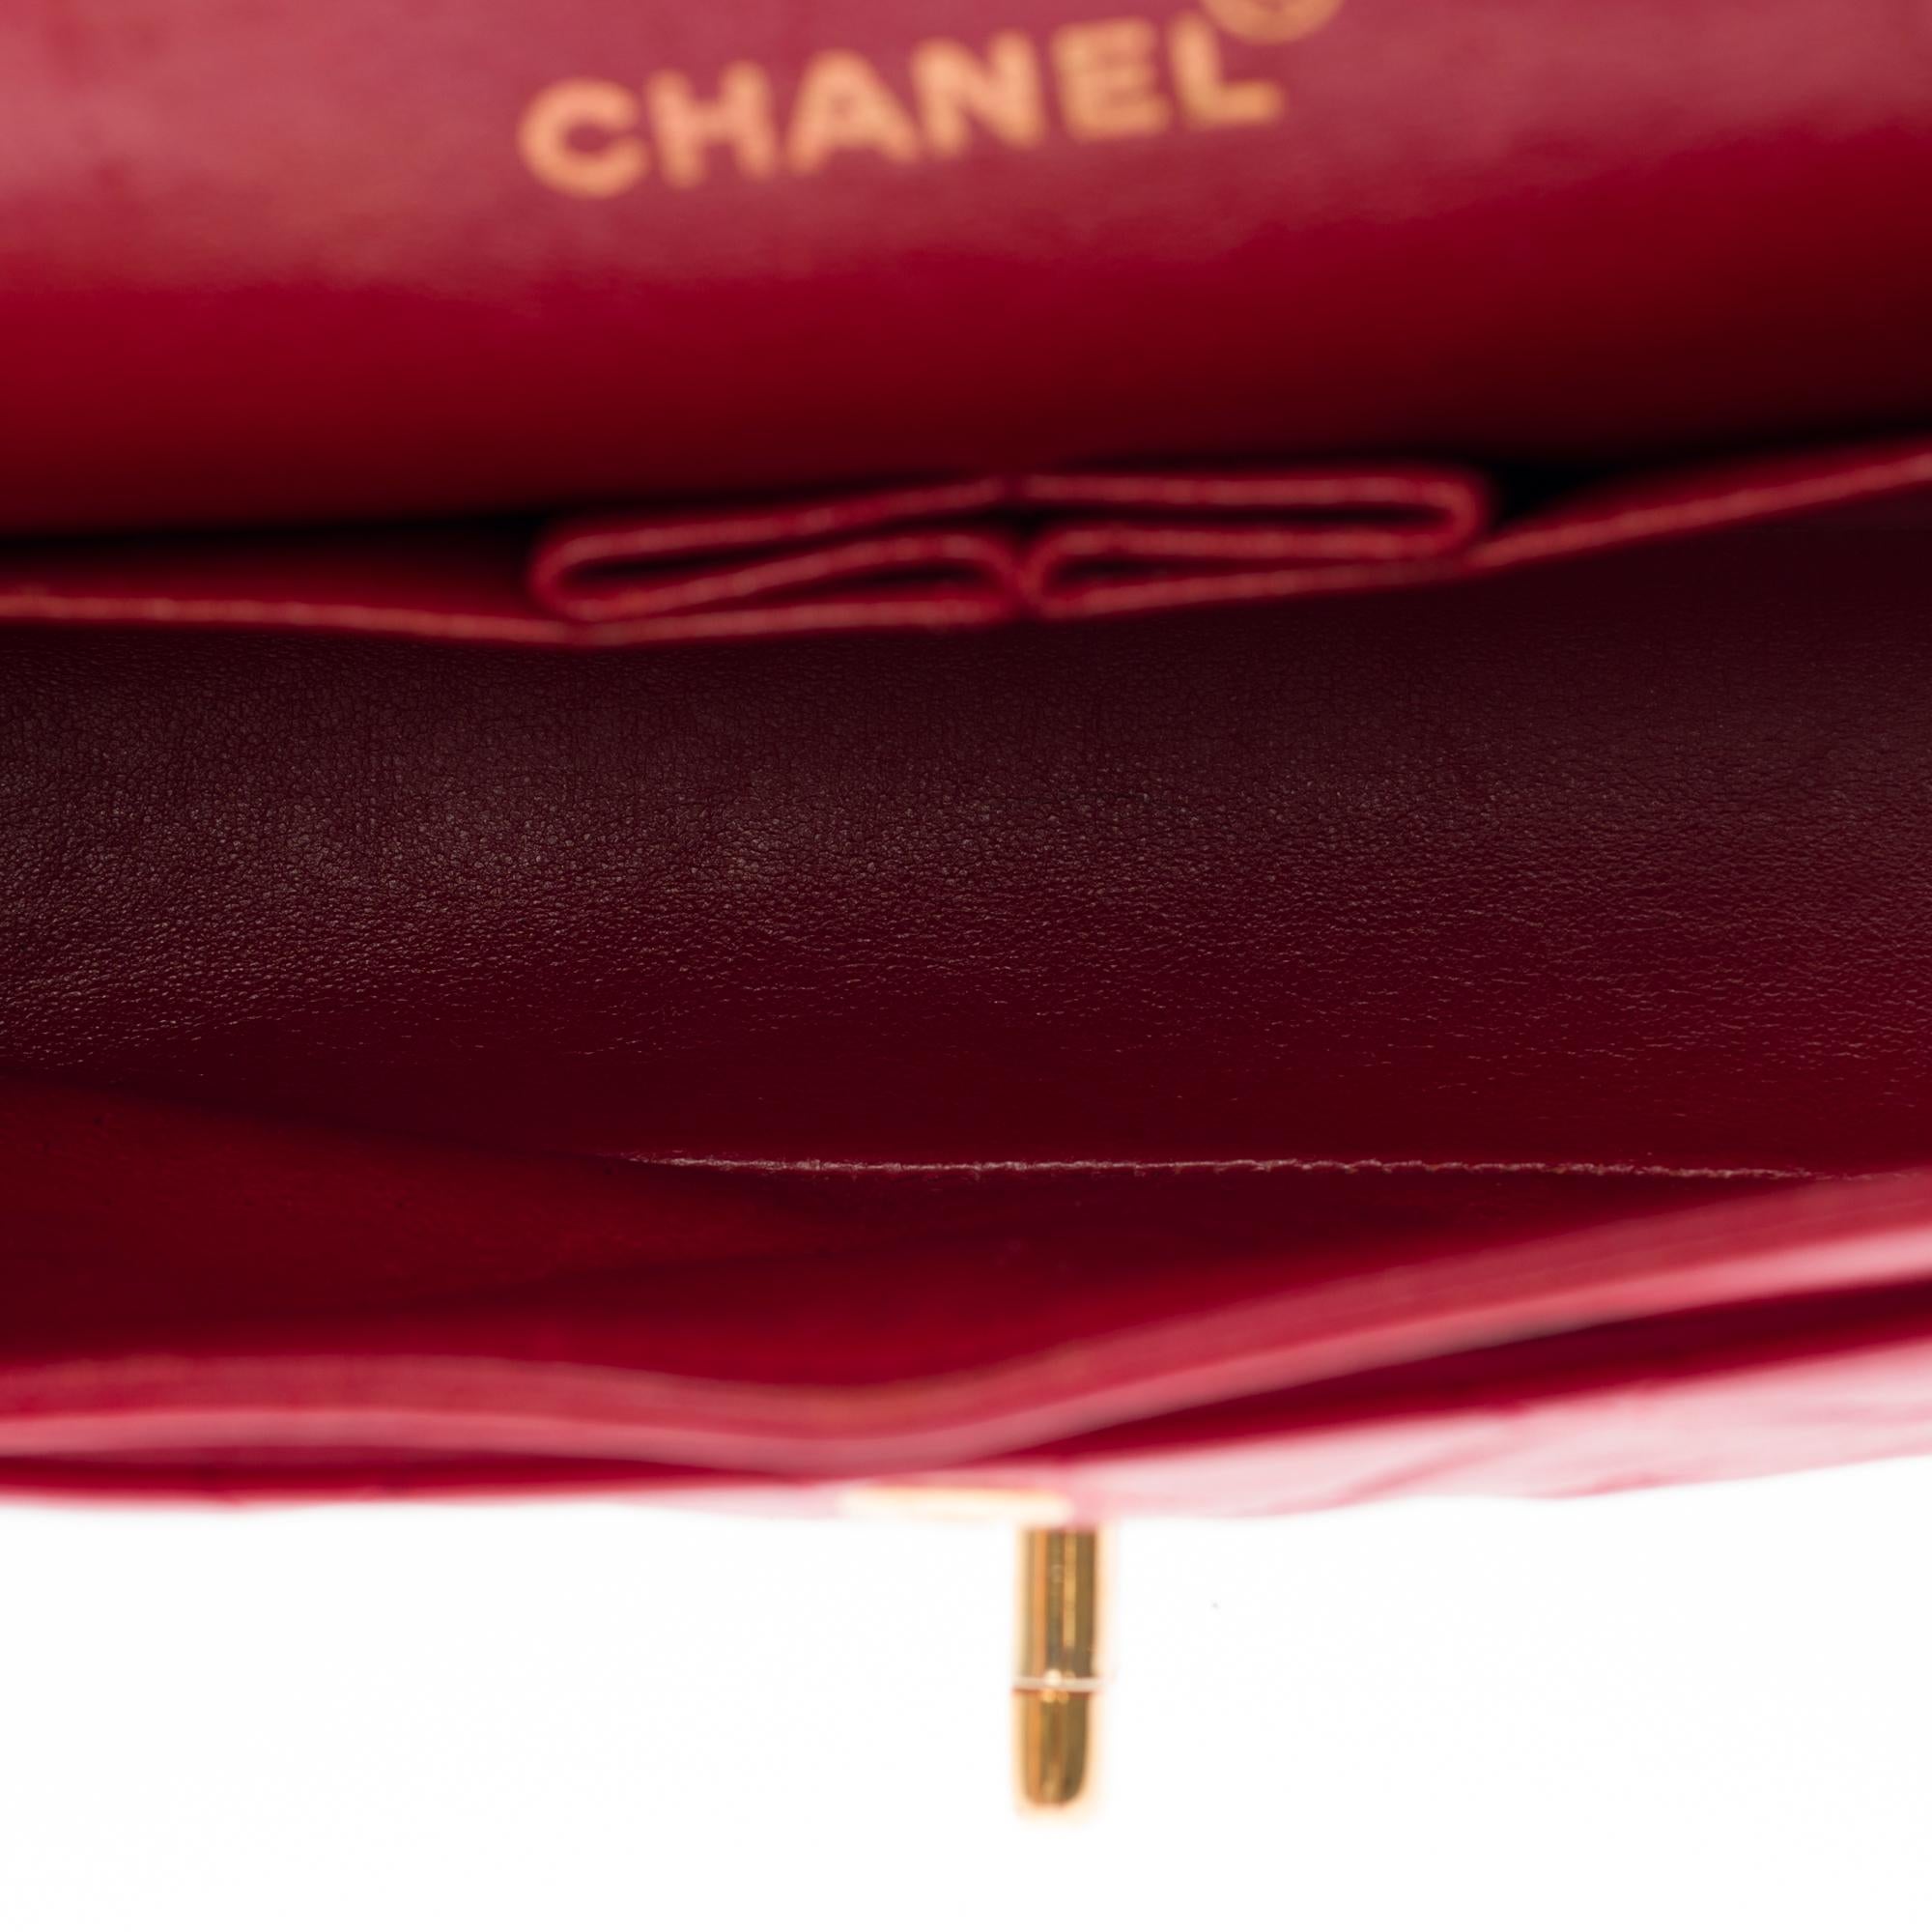 Chanel Timeless Medium double flap Shoulder bag in Red quilted leather, GHW 3